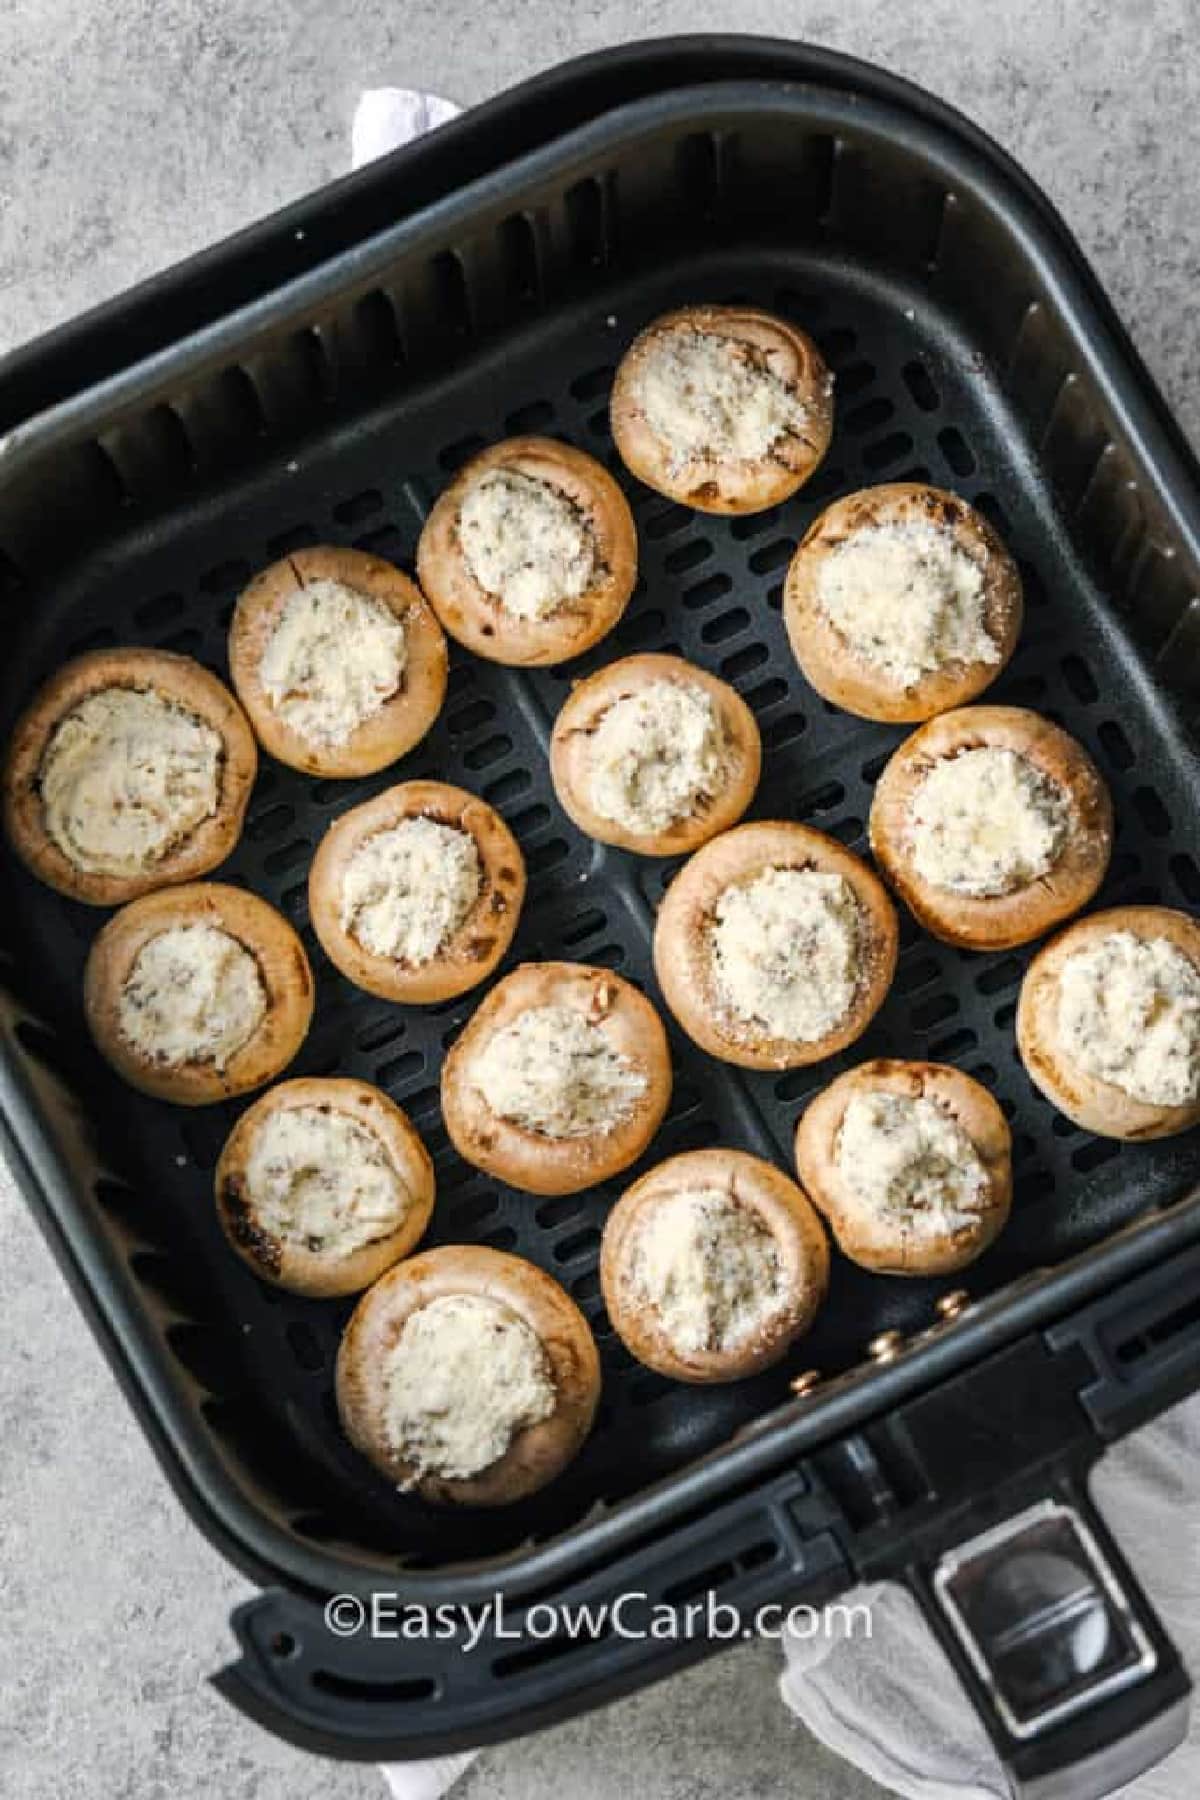 uncooked air fryer stuffed mushrooms in the bottom of an air fryer basket